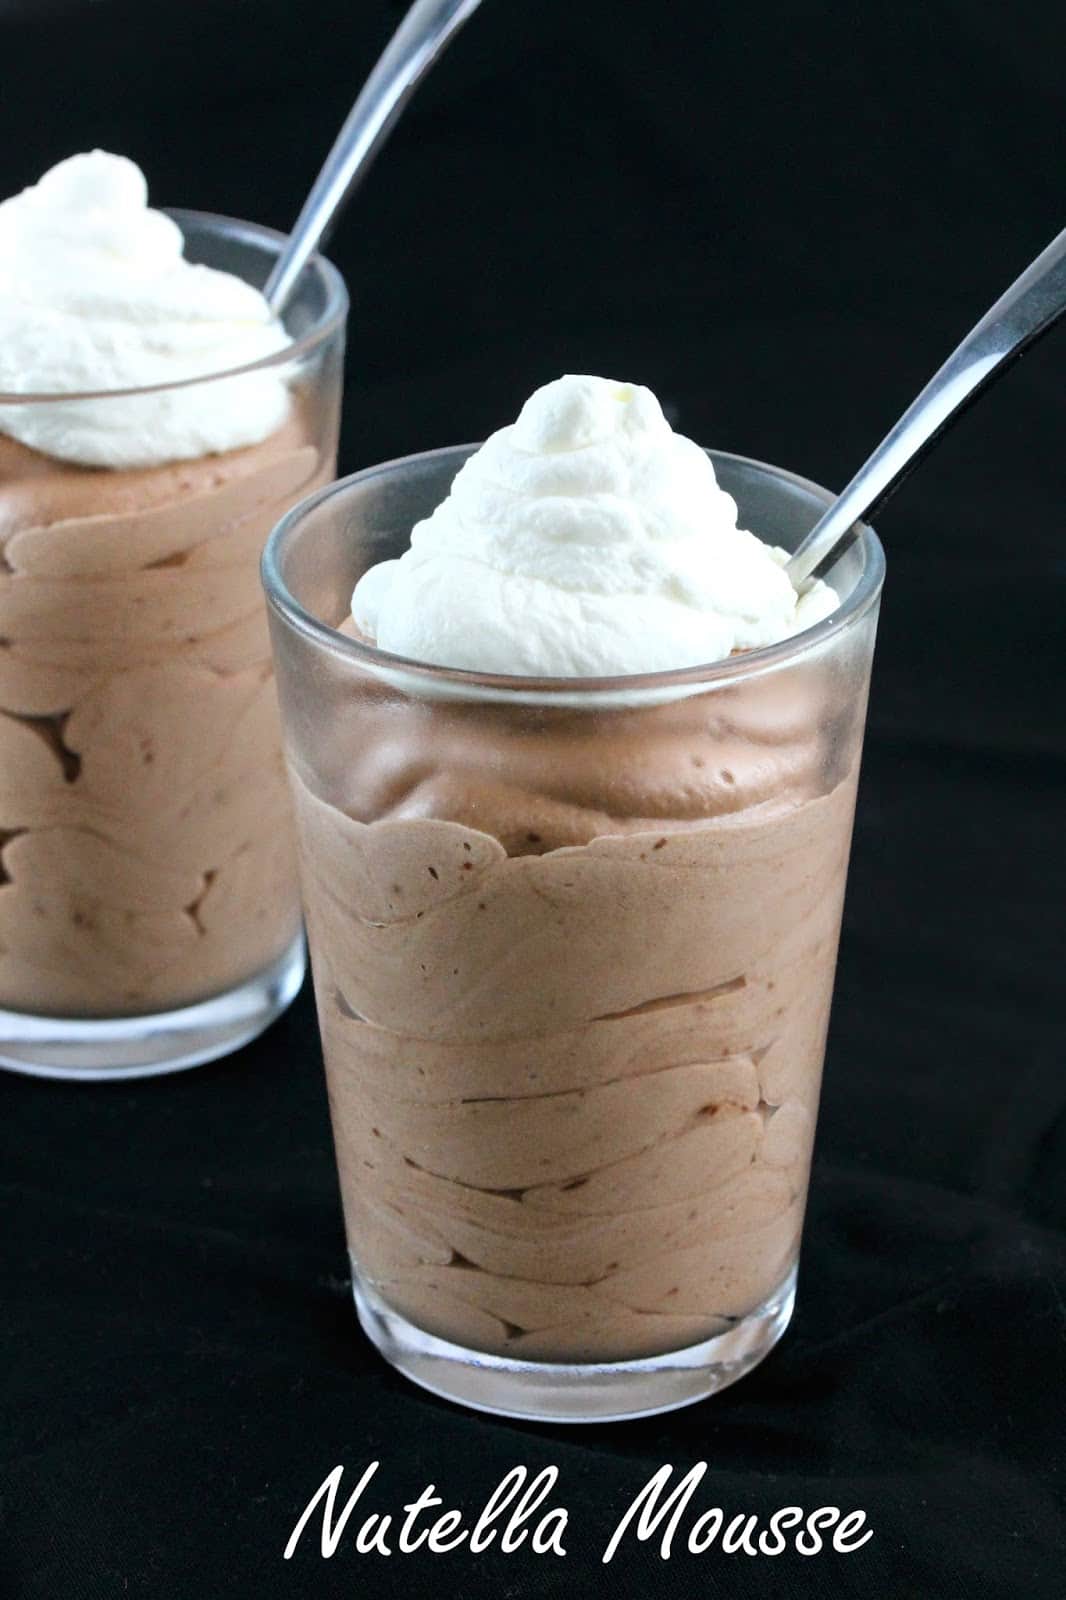 Nutella mousse topped with whipped cream in a glass with a spoon in it.